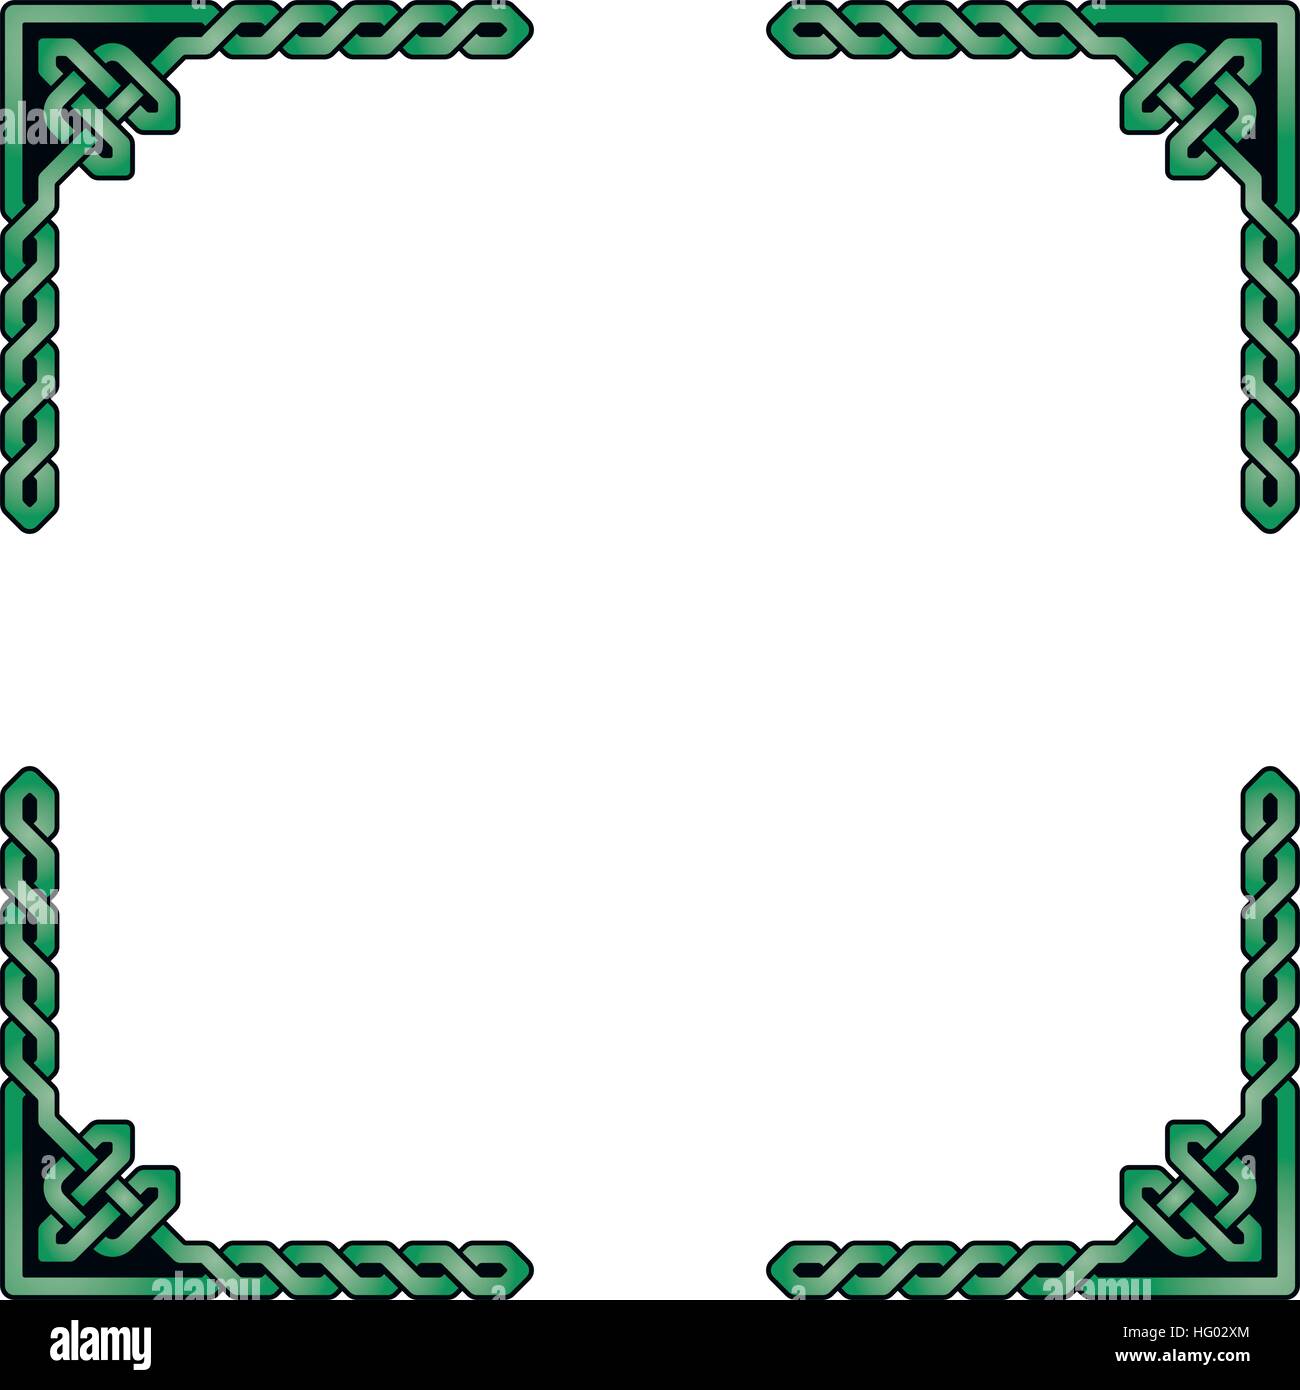 Traditional Celtic braided frame elements, green shades, black outline Stock Vector